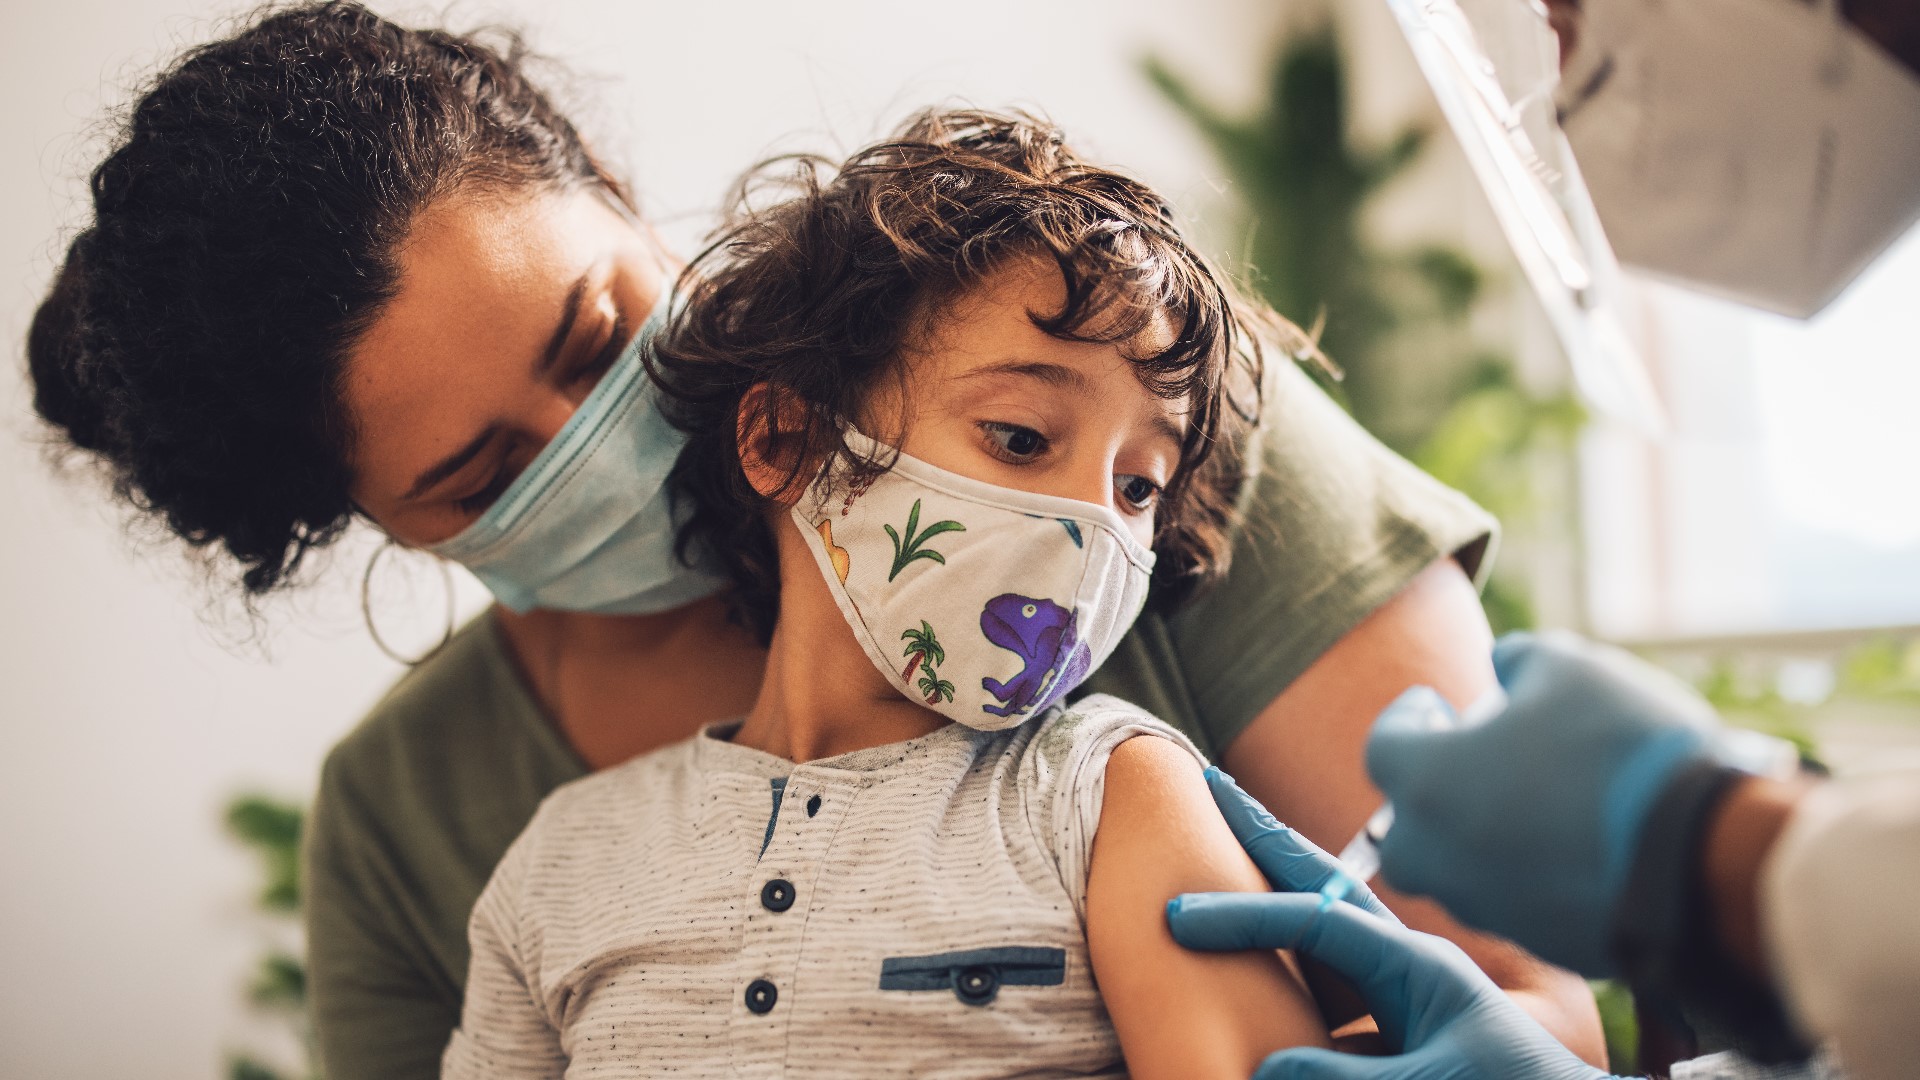 COVID-19 vaccines for kids under 5 are now available. Pharmaceutical company Pfizer and drugmaker Moderna just got the green light from the FDA.